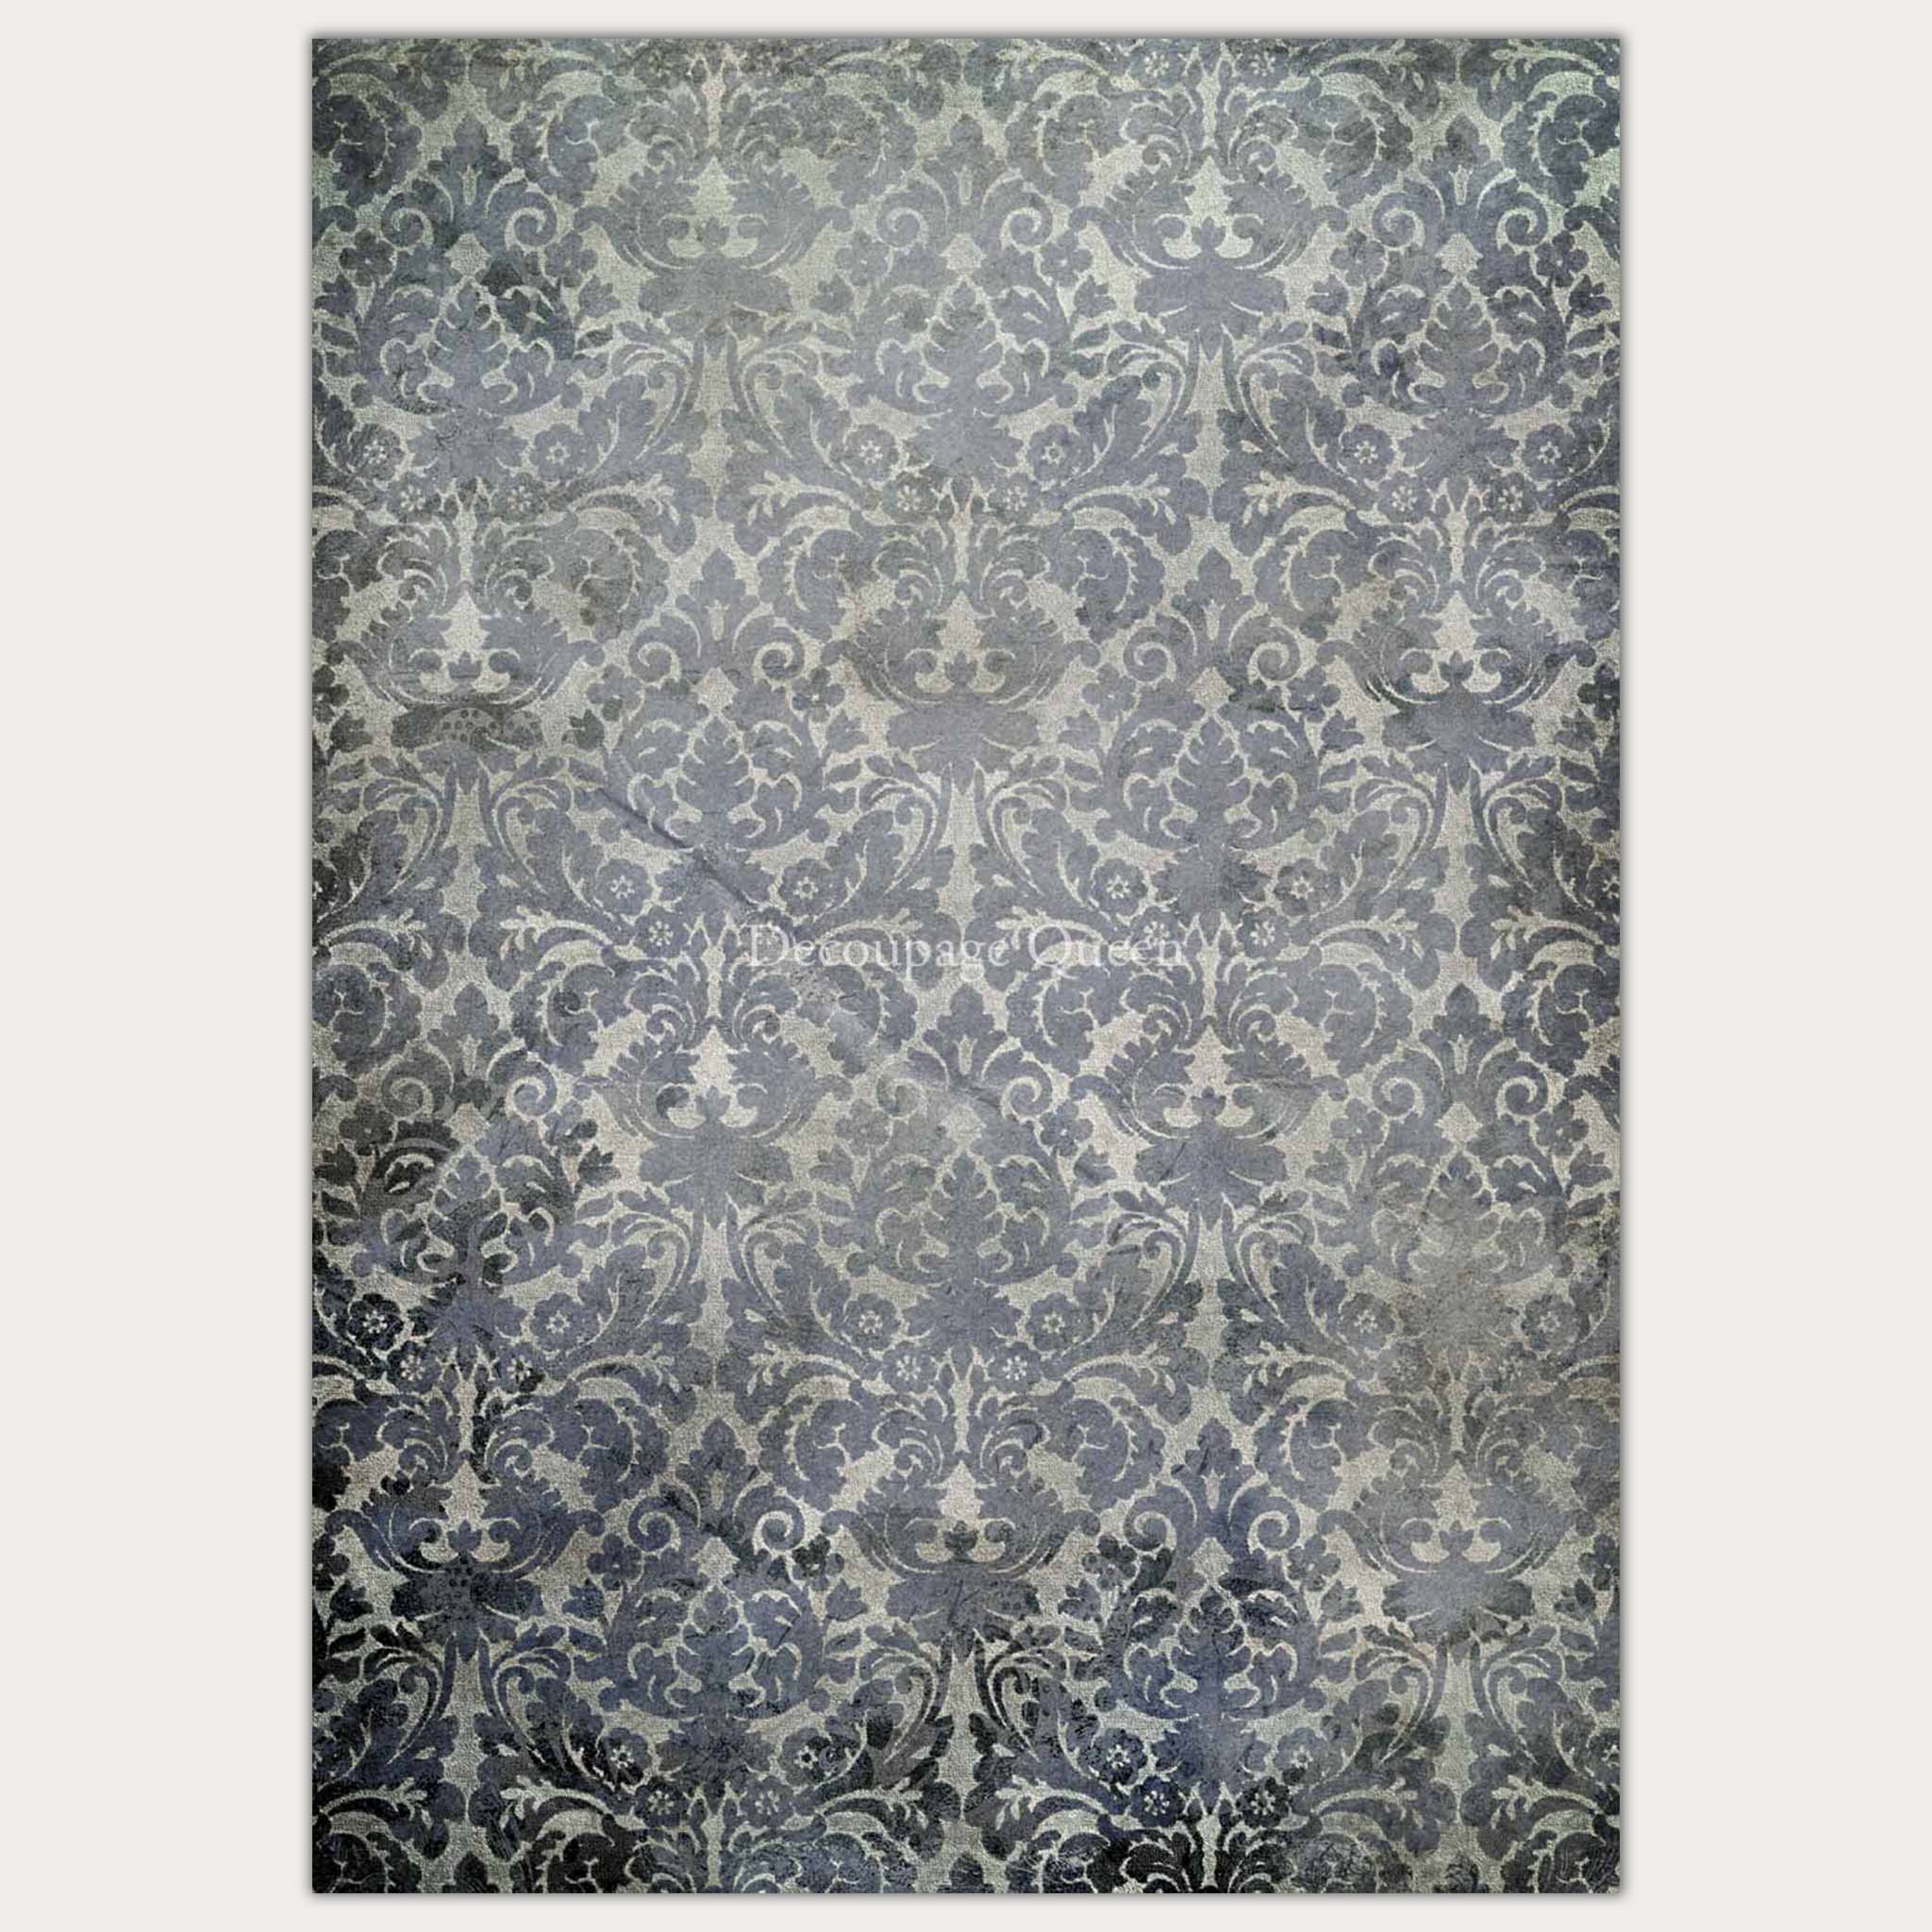 A2 rice paper design that features a faded blue damask wallpaper pattern. White borders are on the sides.